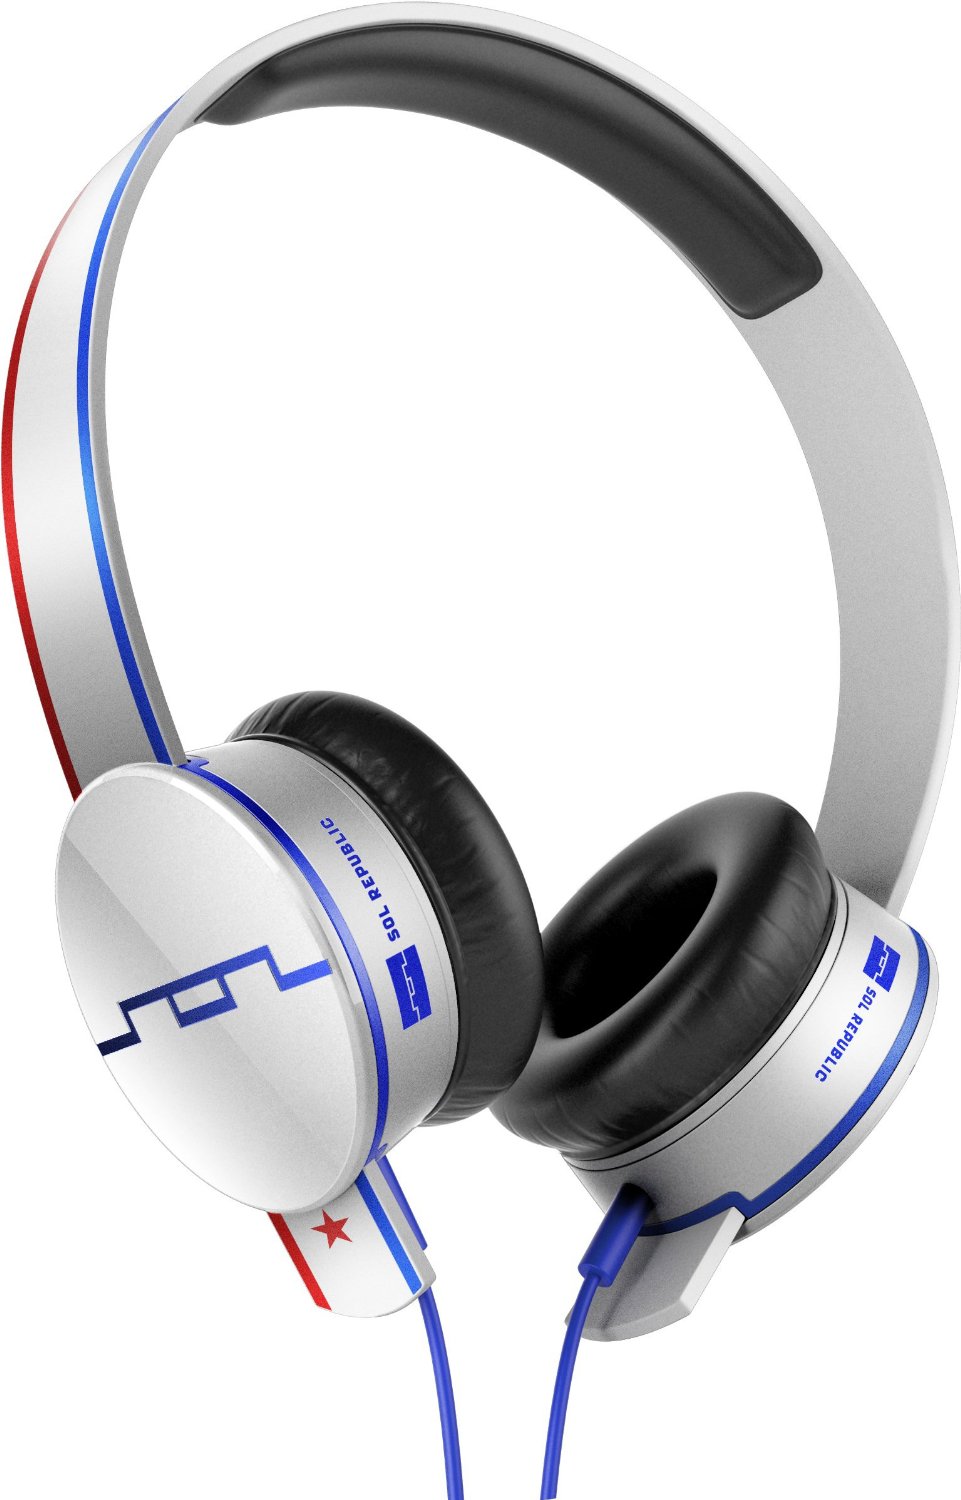 SOL REPUBLIC 1291-US Tracks Anthem On-Ear Headphones with Three-Button Remote and Microphone Featuring Michael Phelps Collaboration, Multicolored • Symphony Hifi